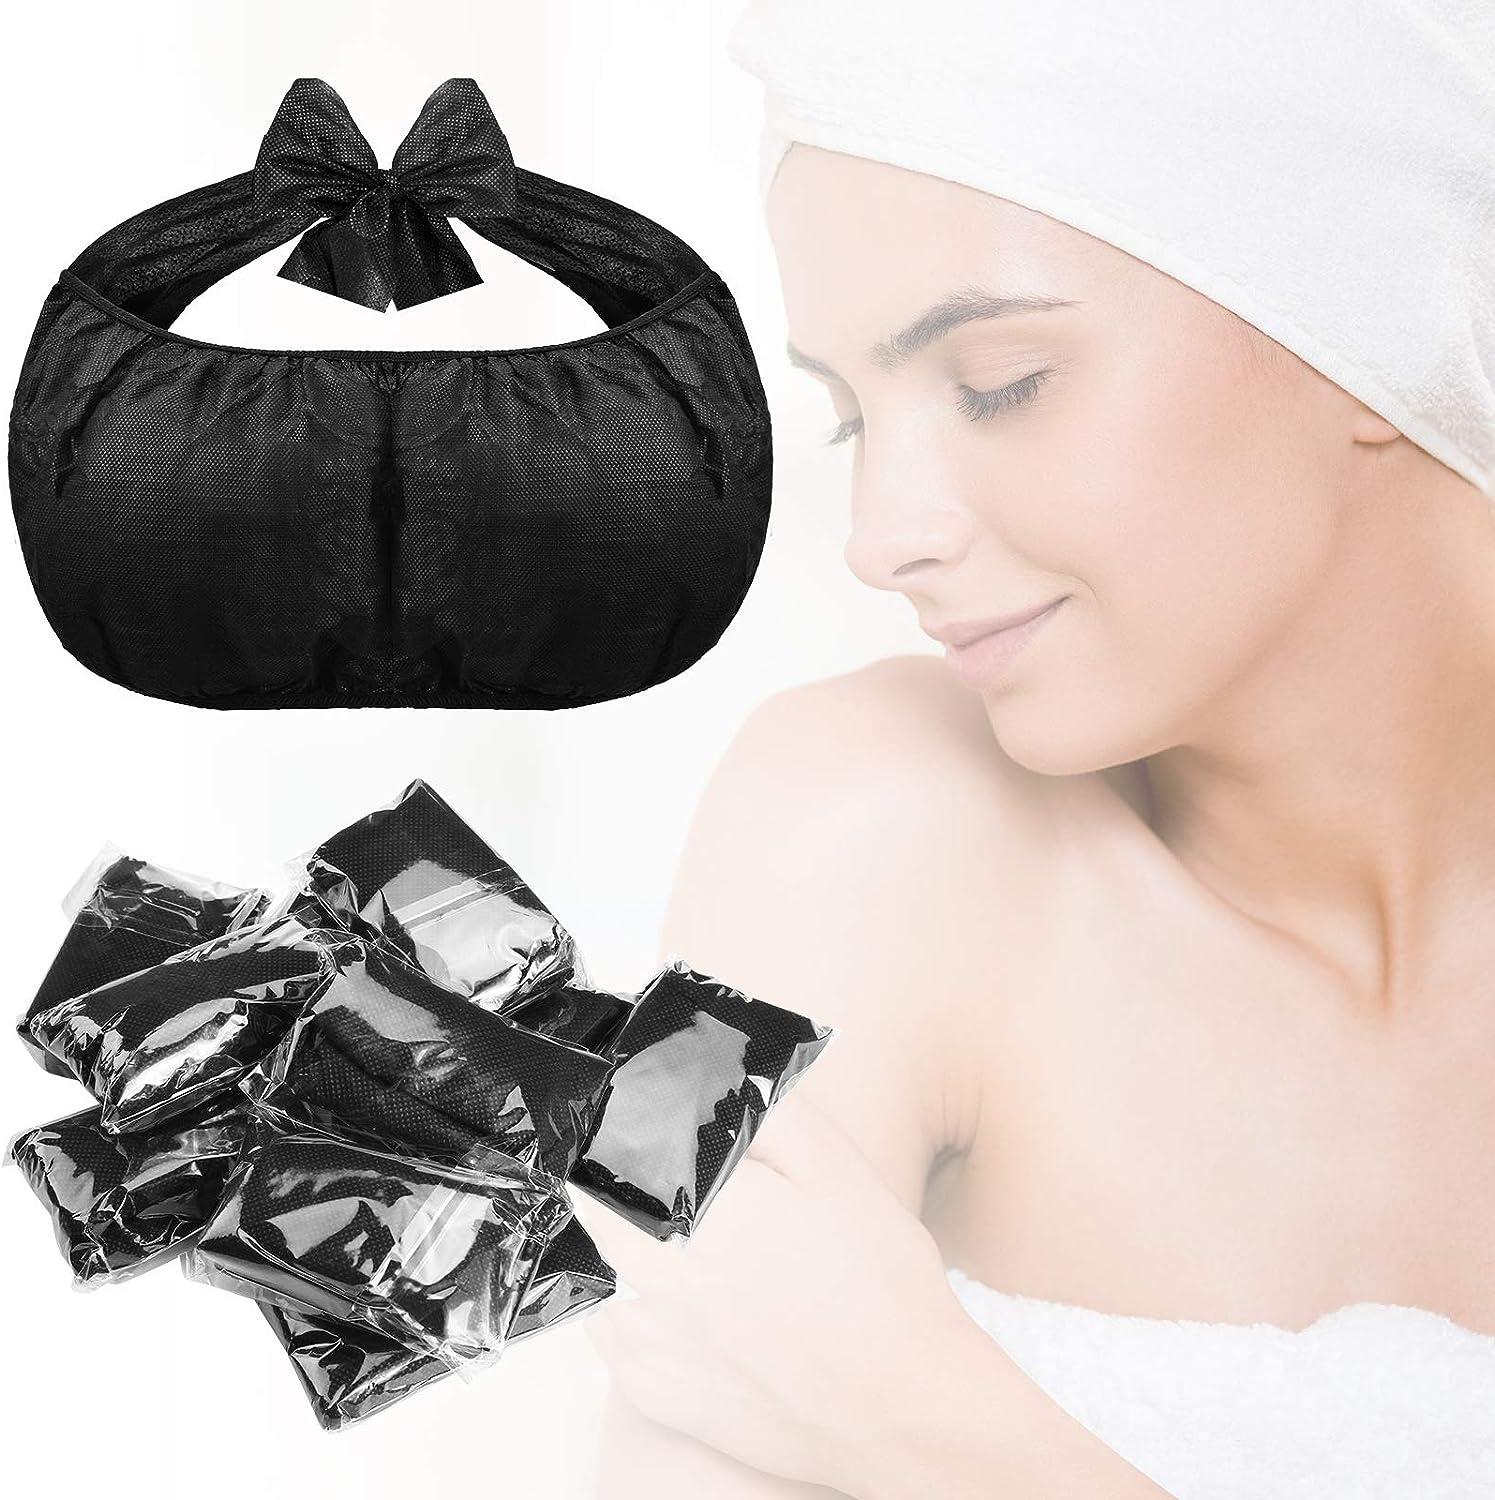  APPEARUS 50 Ct. Disposable Bras - Women's Backless Spa